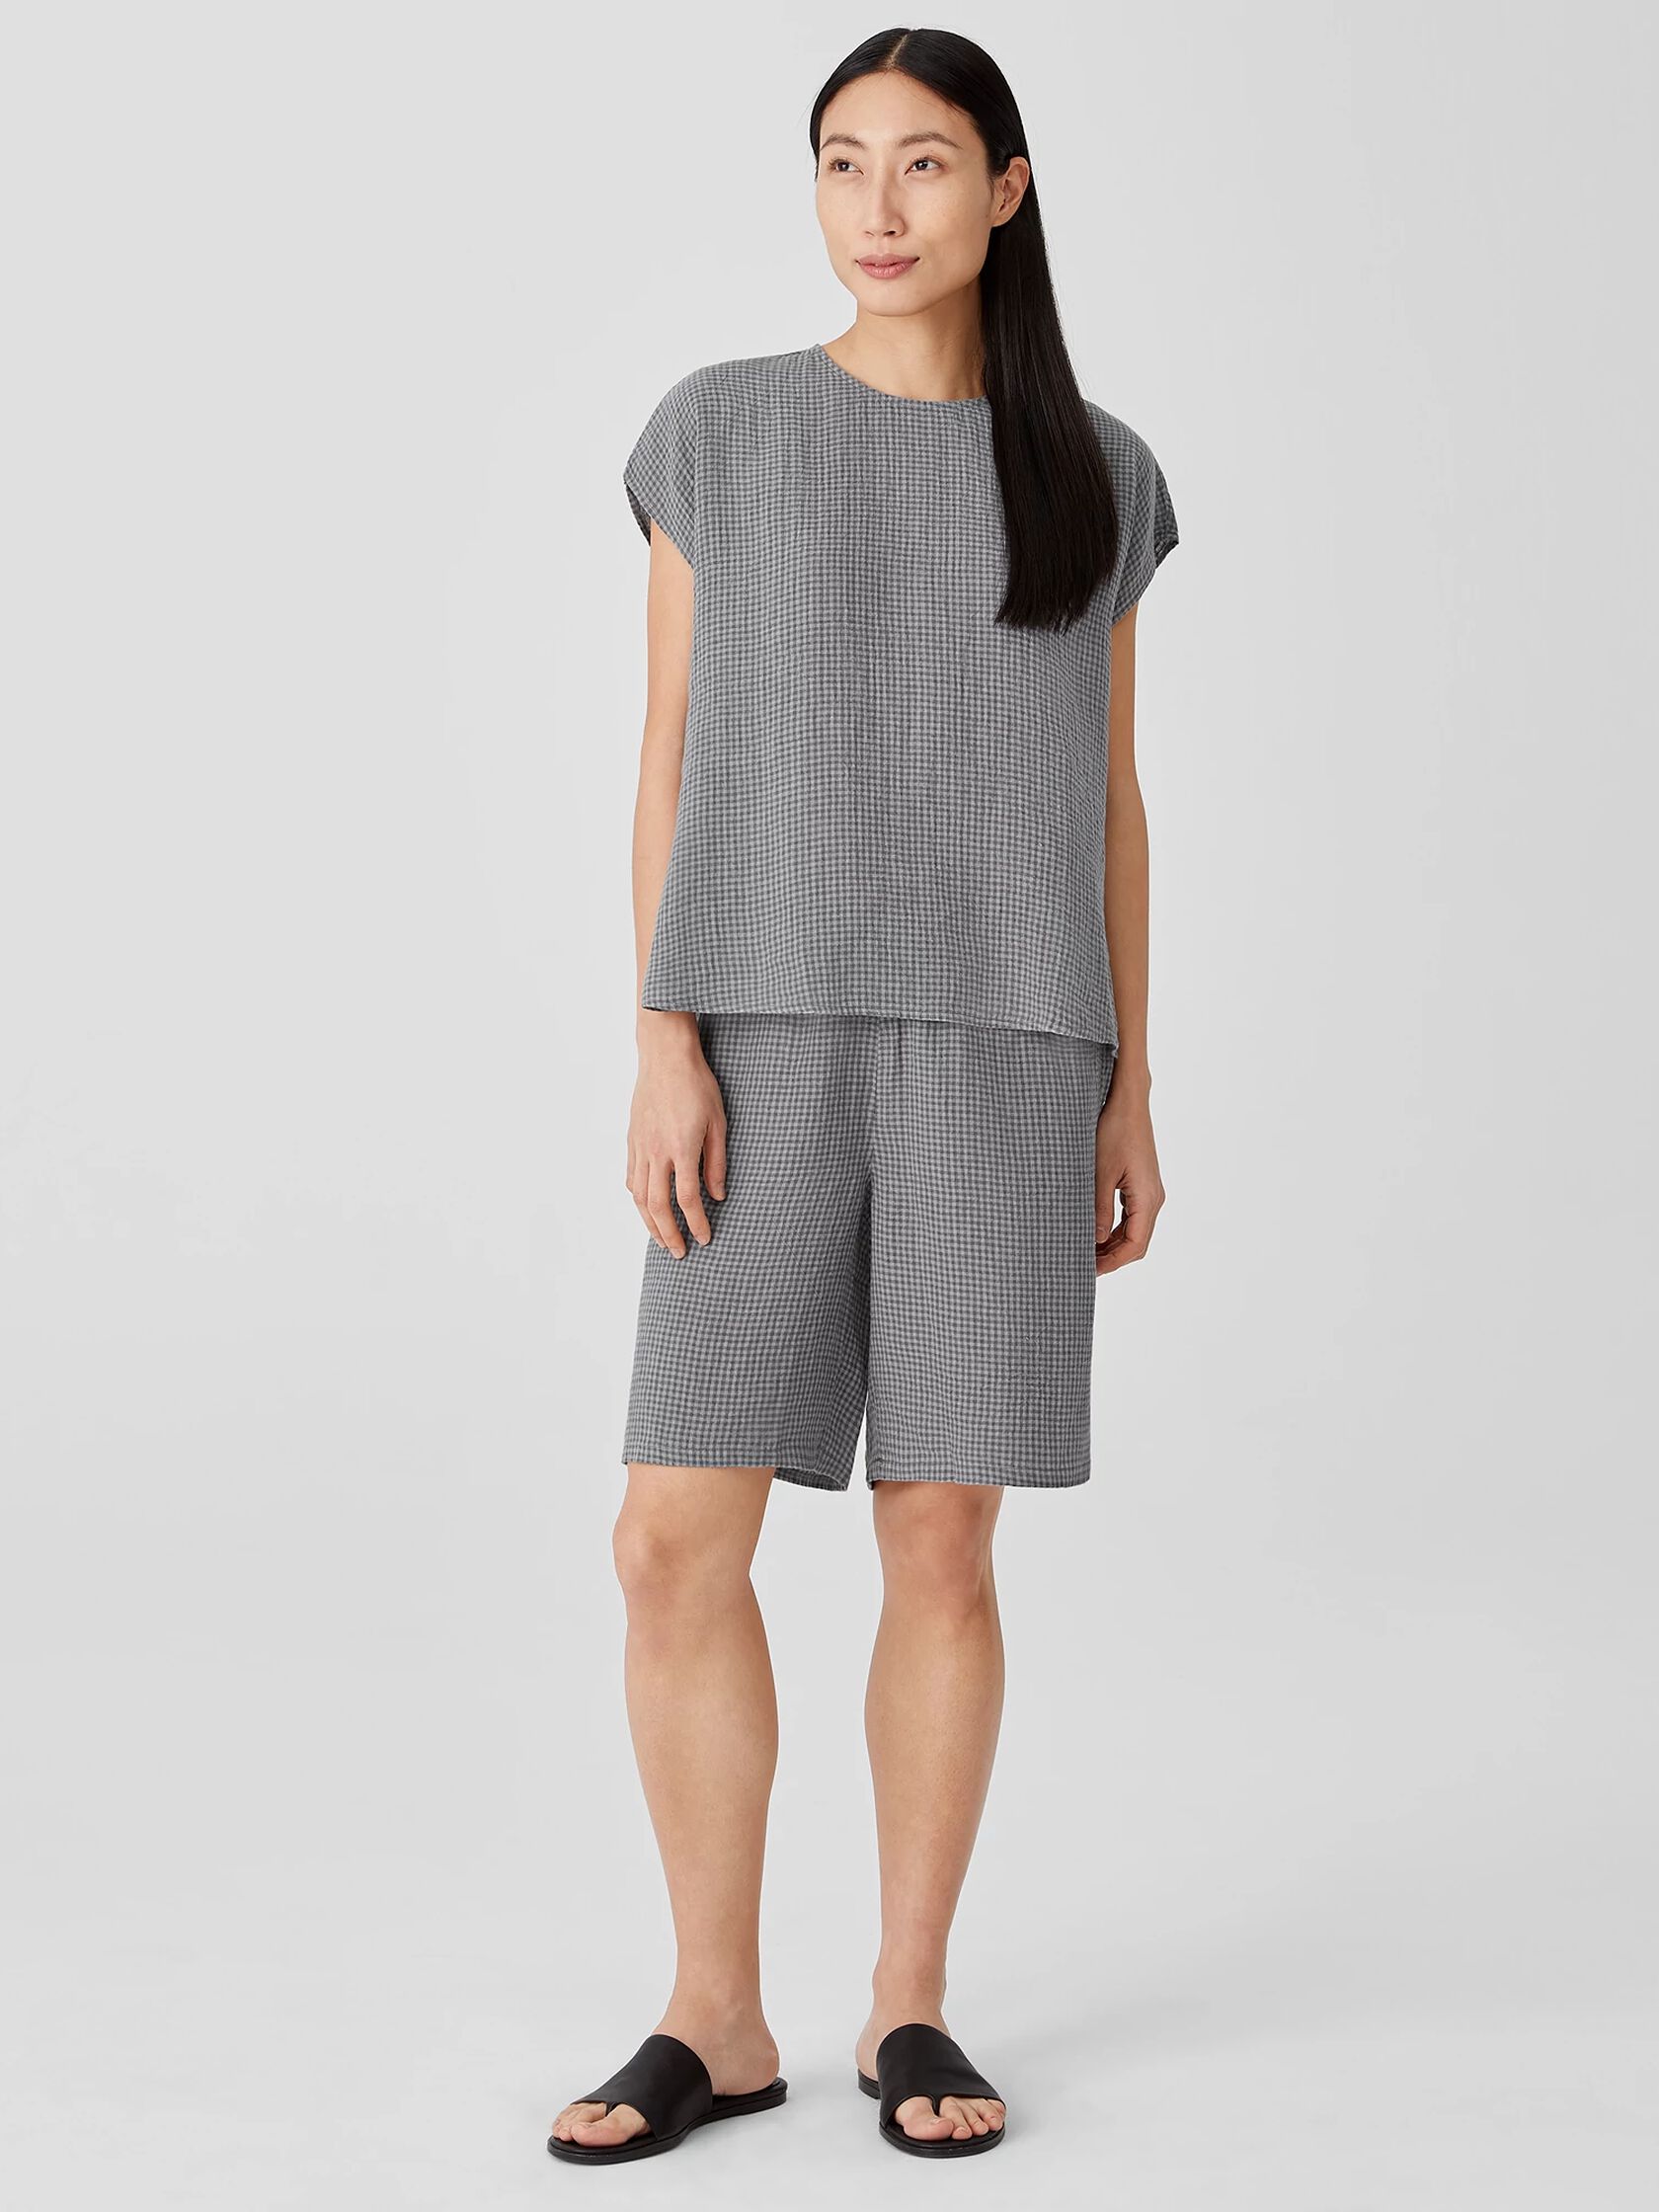 Puckered Organic Linen Square Top | EILEEN FISHER